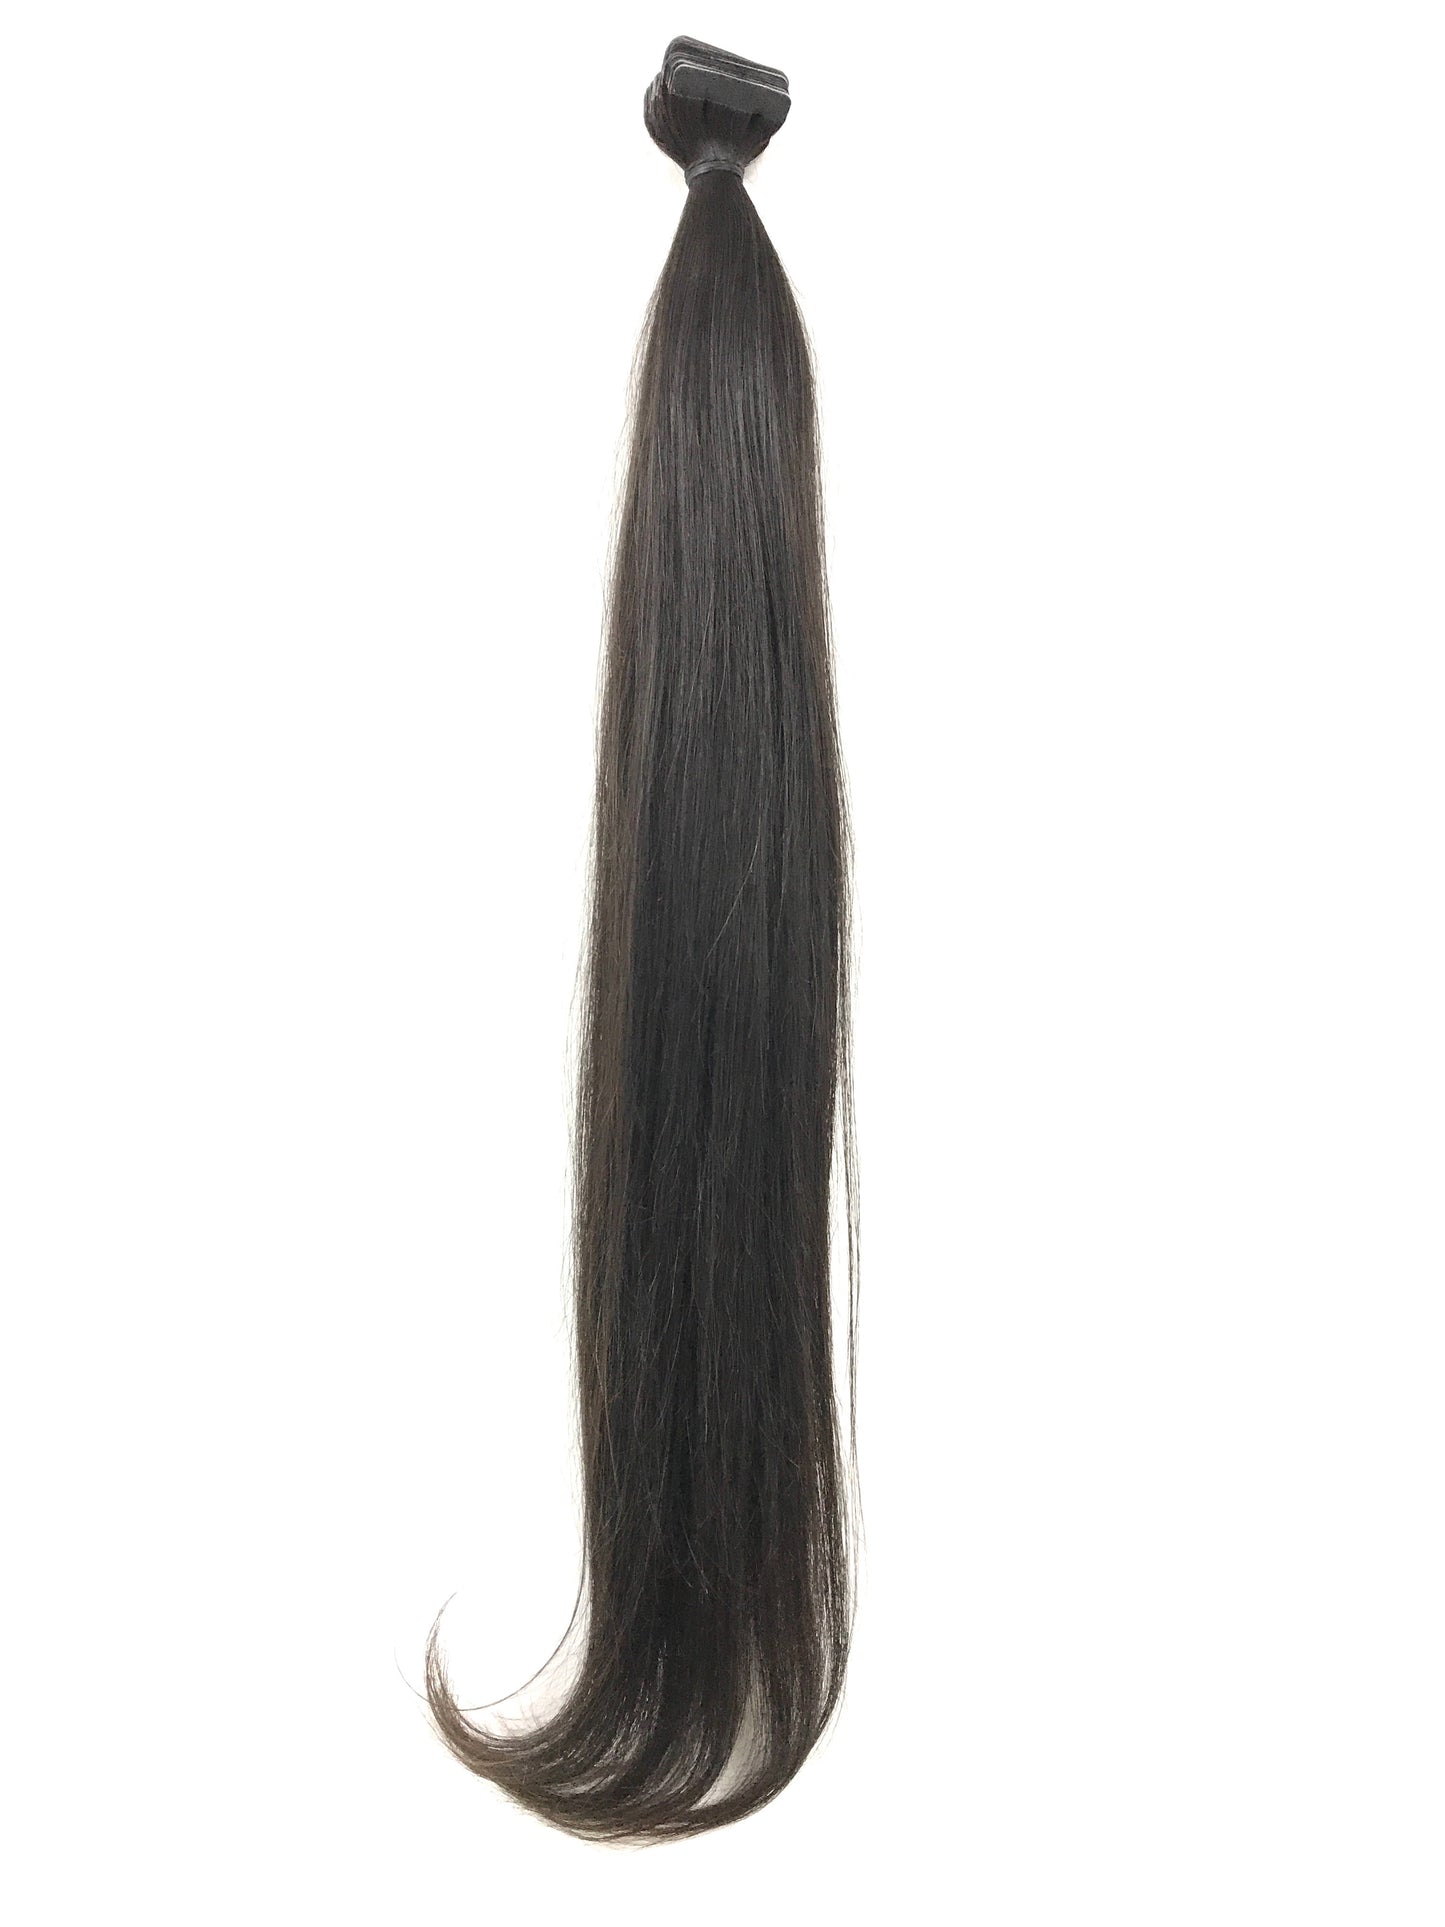 Brazilian Virgin Remy Human Hair, Tape Extensions, Straight, 18'', Virgin, Uncoloured. Quick Shipping!-Virgin Hair & Beauty, The Best Hair Extensions, Real Virgin Human Hair.